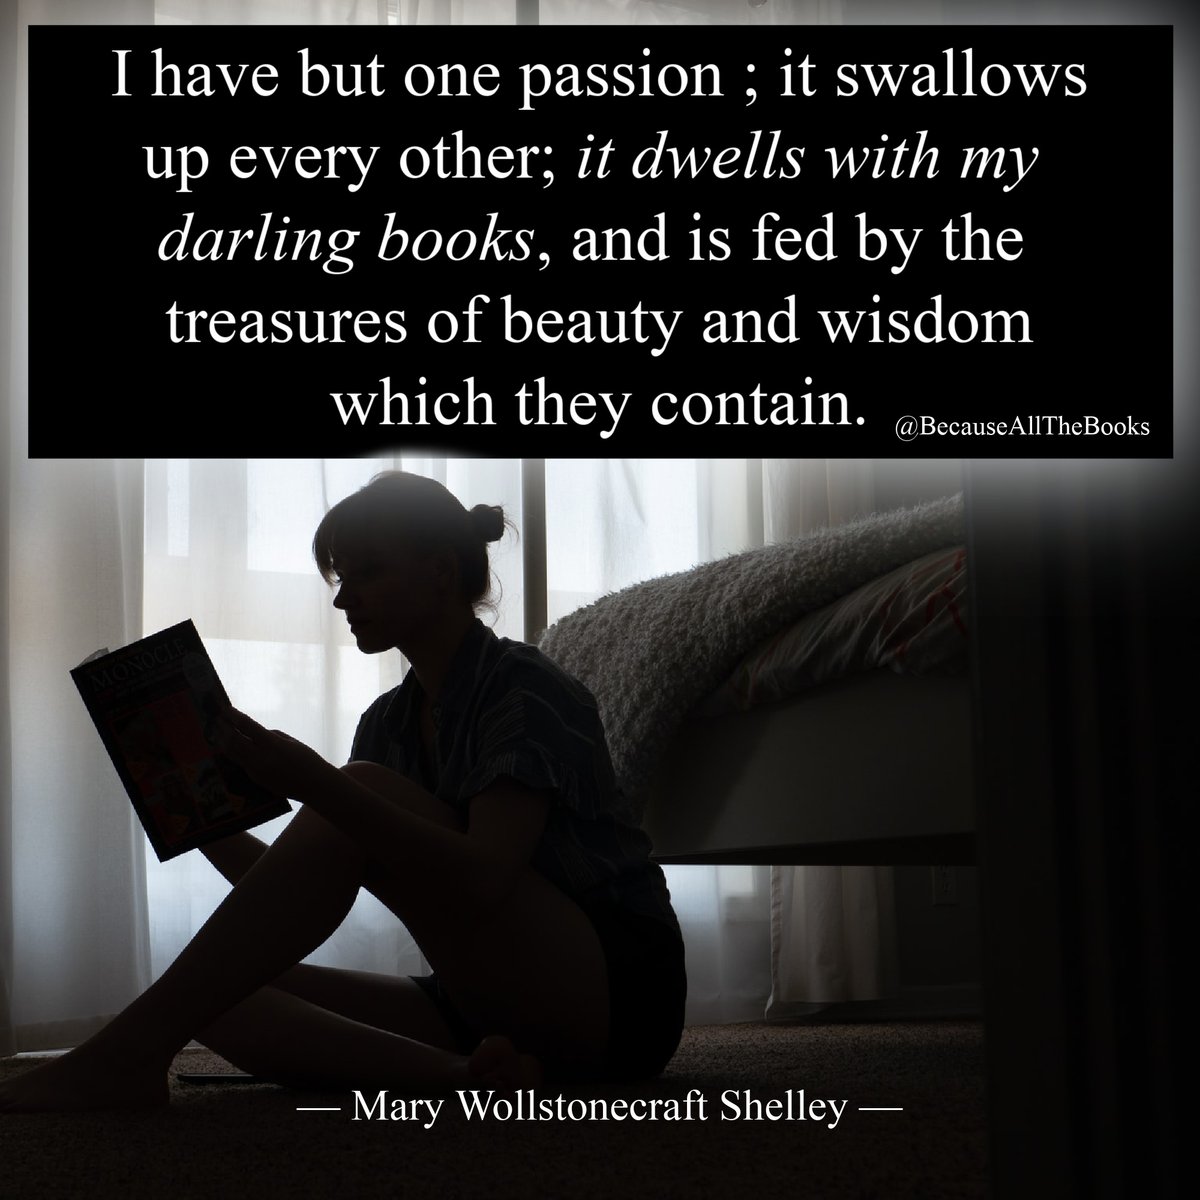 Passion for reading is a wonderful way to always have something to look forward to.

#BecauseAllTheBooks #TimeToRead #ReadMore #ReadItAgain